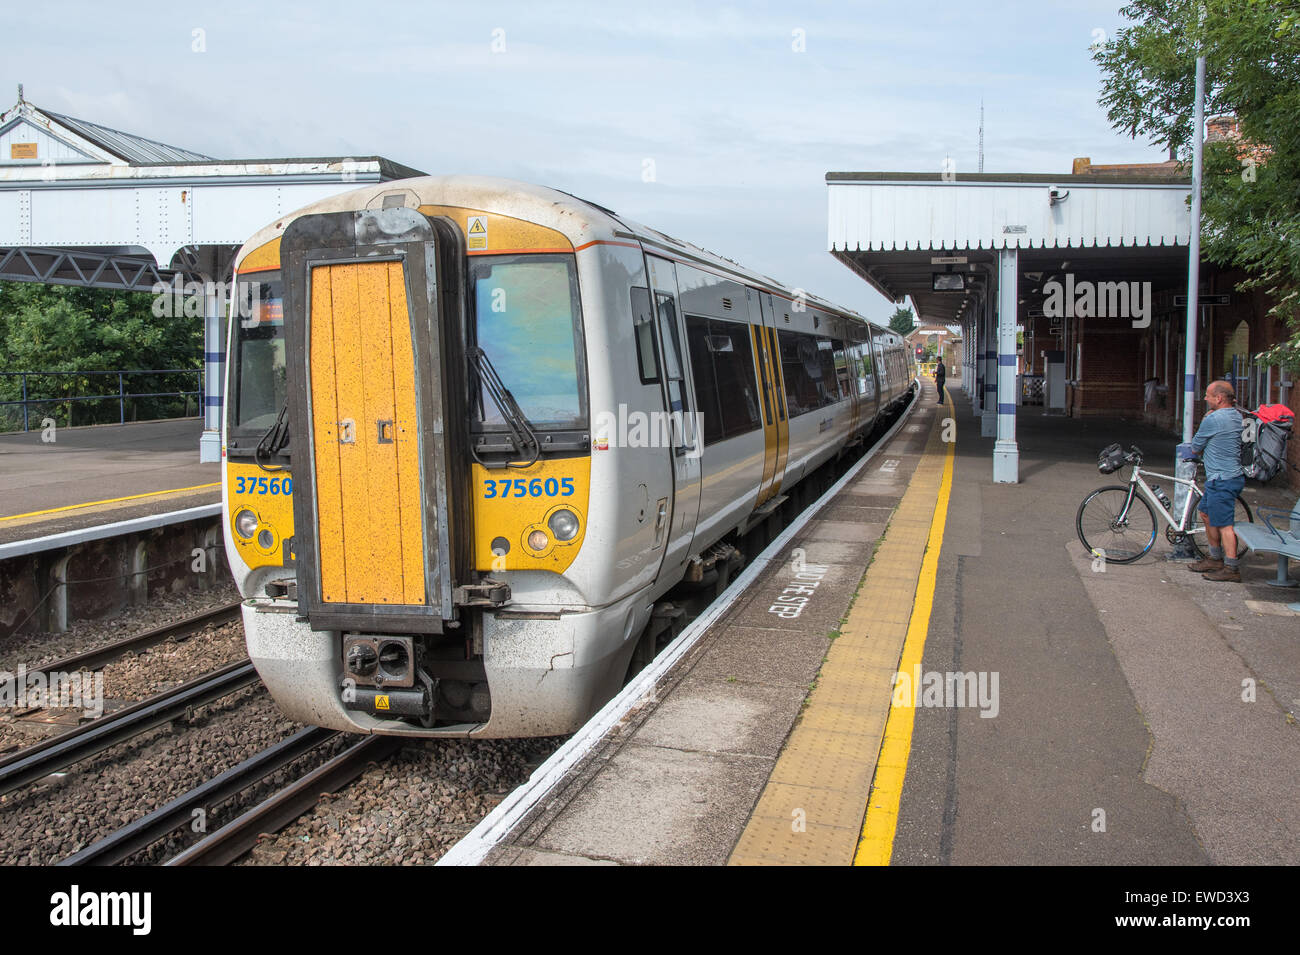 Southeastern Class 375 Electroelectric multiple unit routed from London Victoria to Ramsgate, seen at Herne Bay Railway Station. Stock Photo